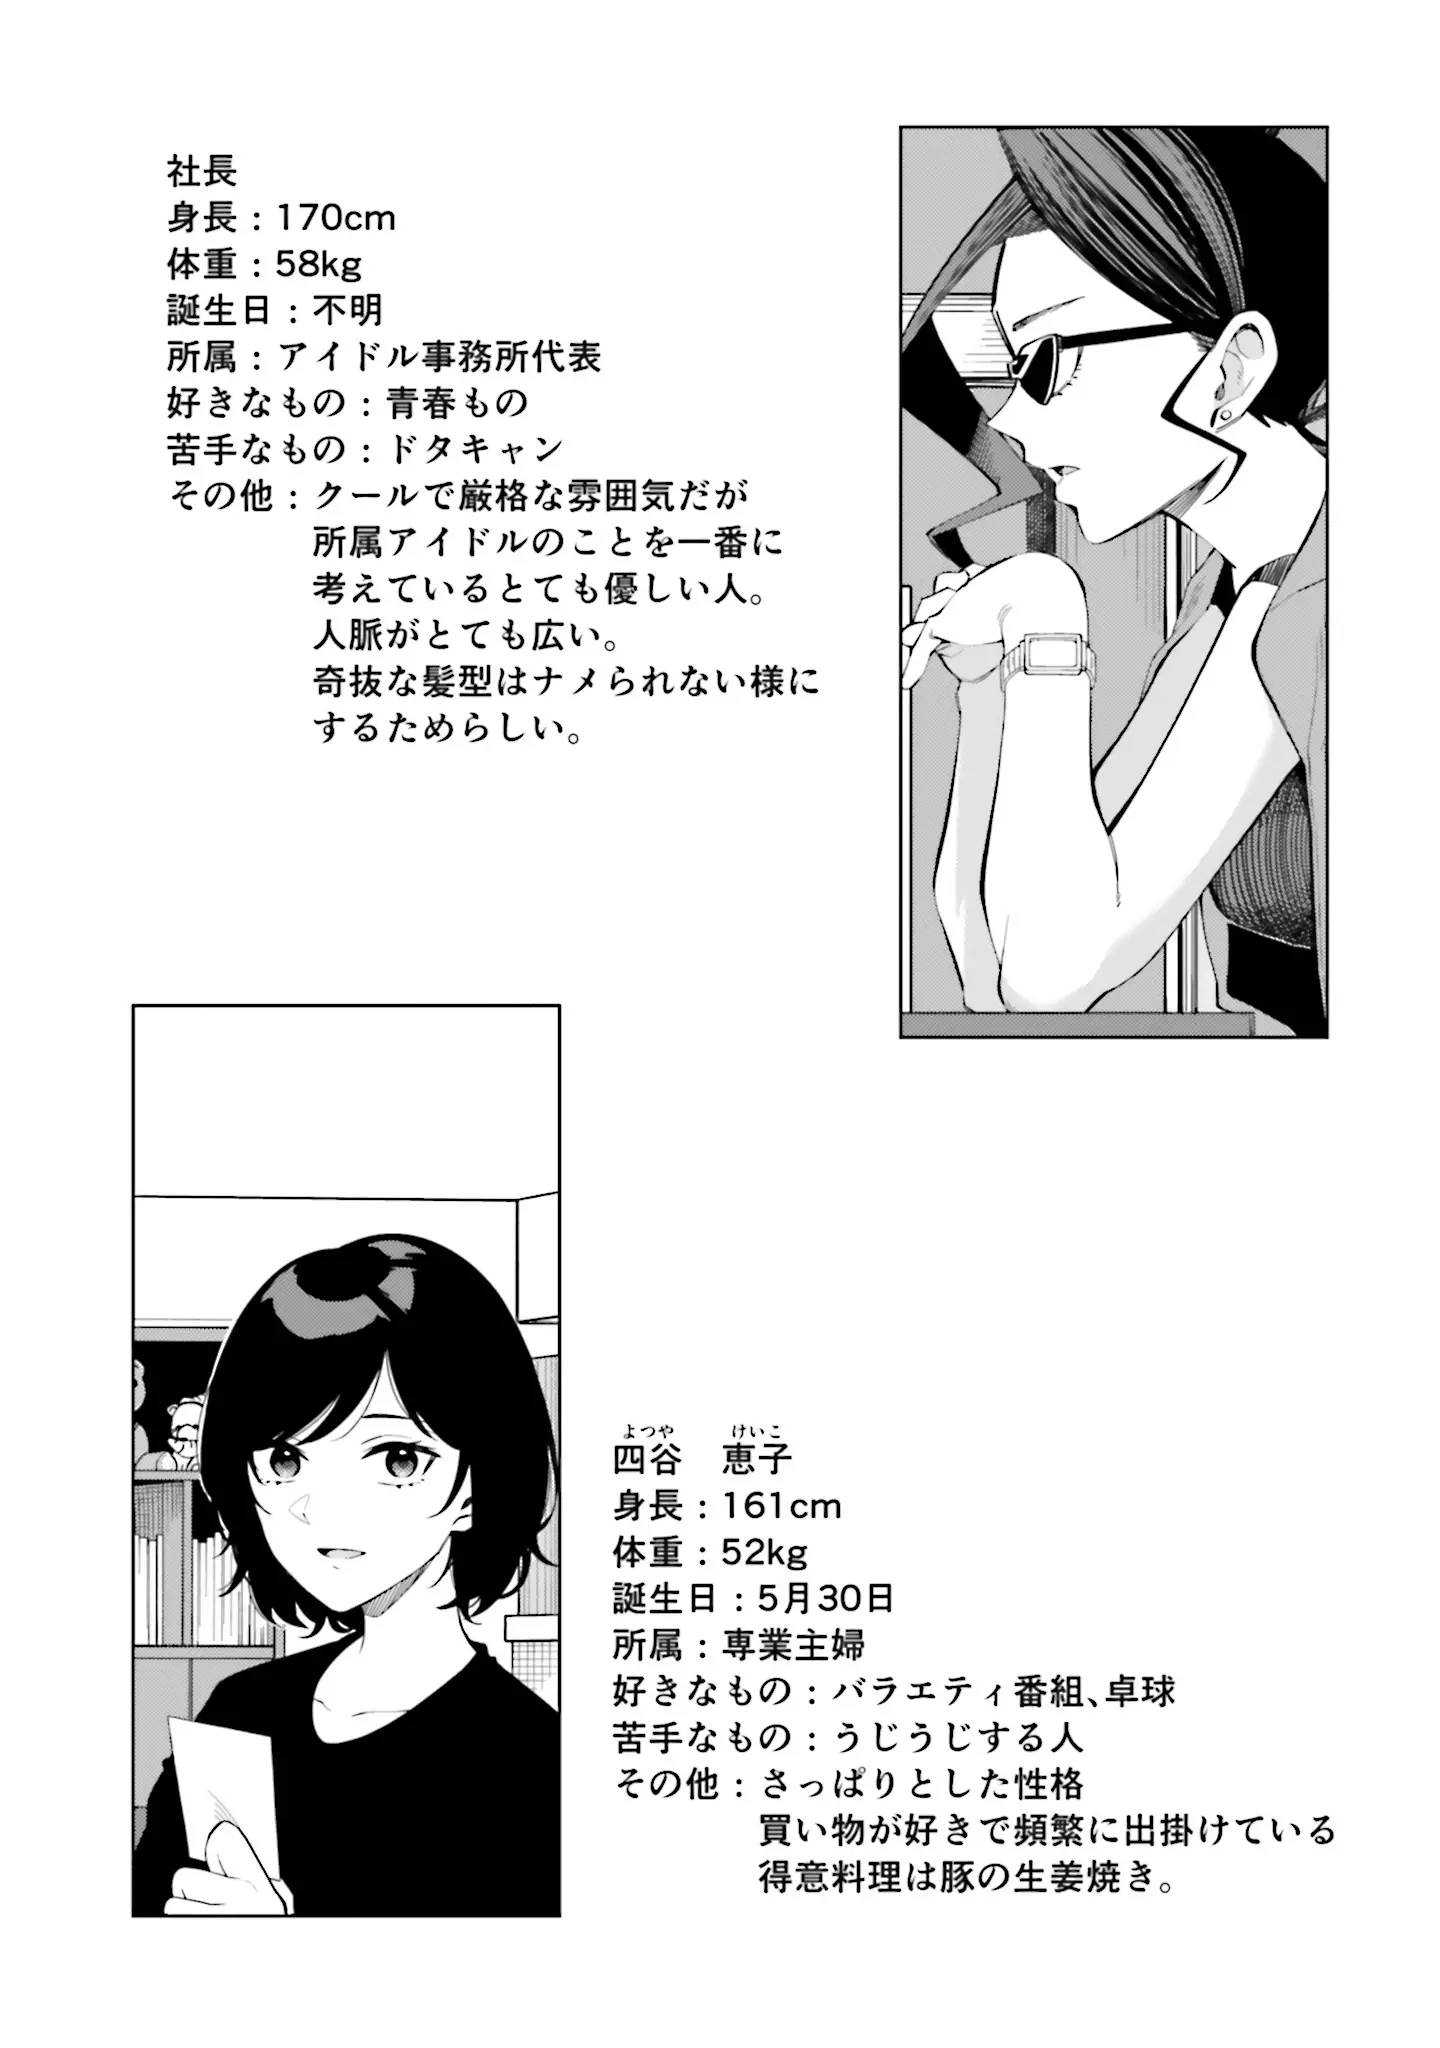 I Don't Understand Shirogane-San's Facial Expression At All - 13 page 30-5db27b26